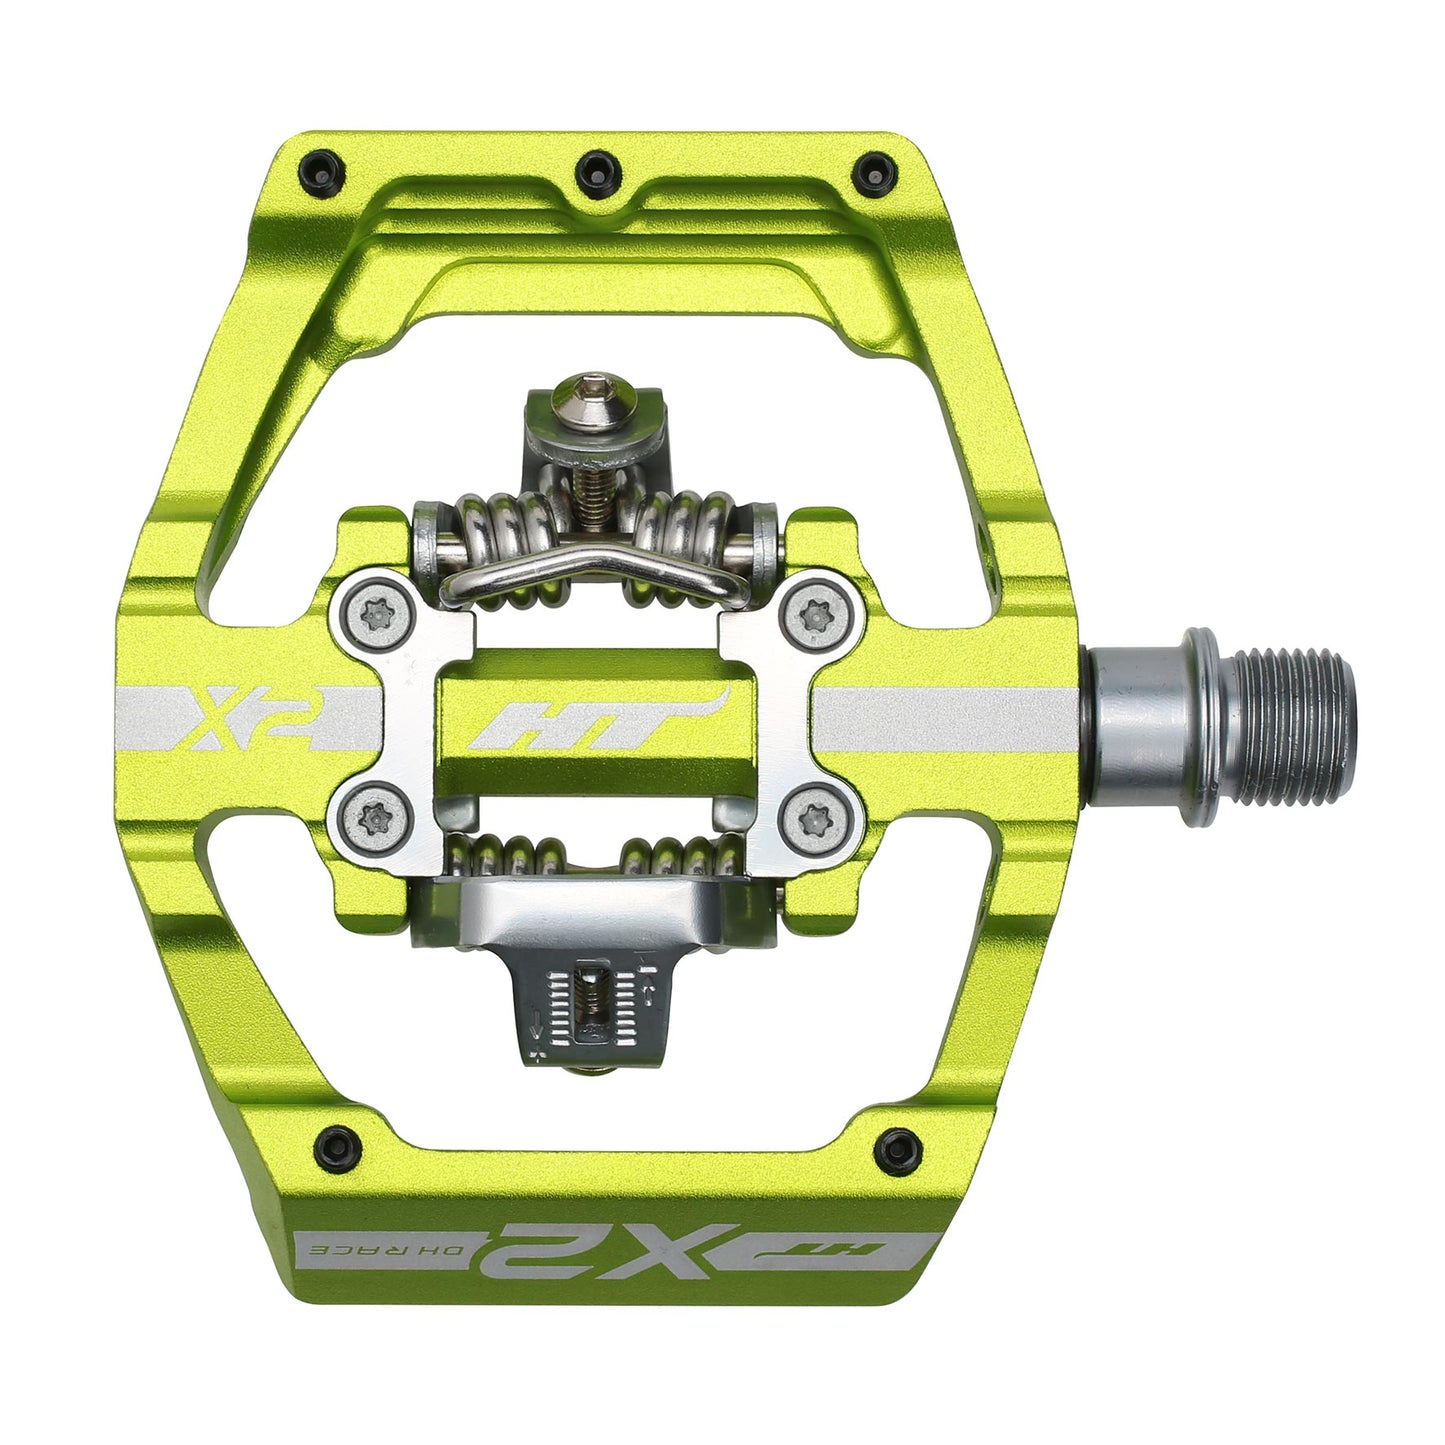 Ht X2 Pedals Alloy / CNC CRMO - Apple Green